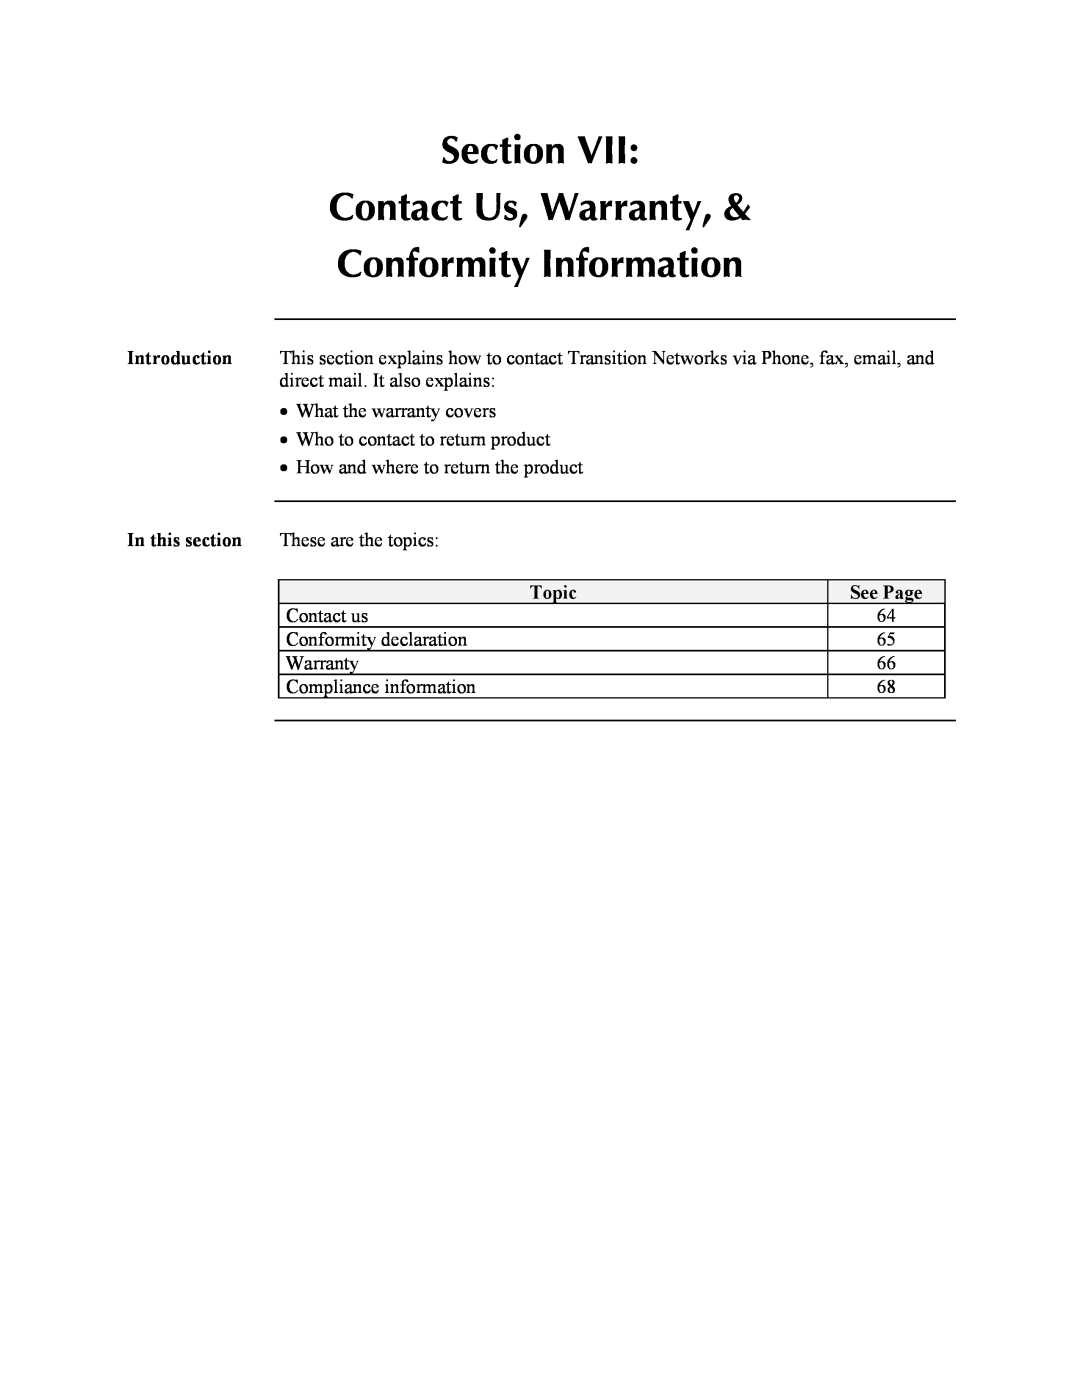 Transition Networks SDSFE31XX-100 Section Contact Us, Warranty, Conformity Information, Introduction, In this section 